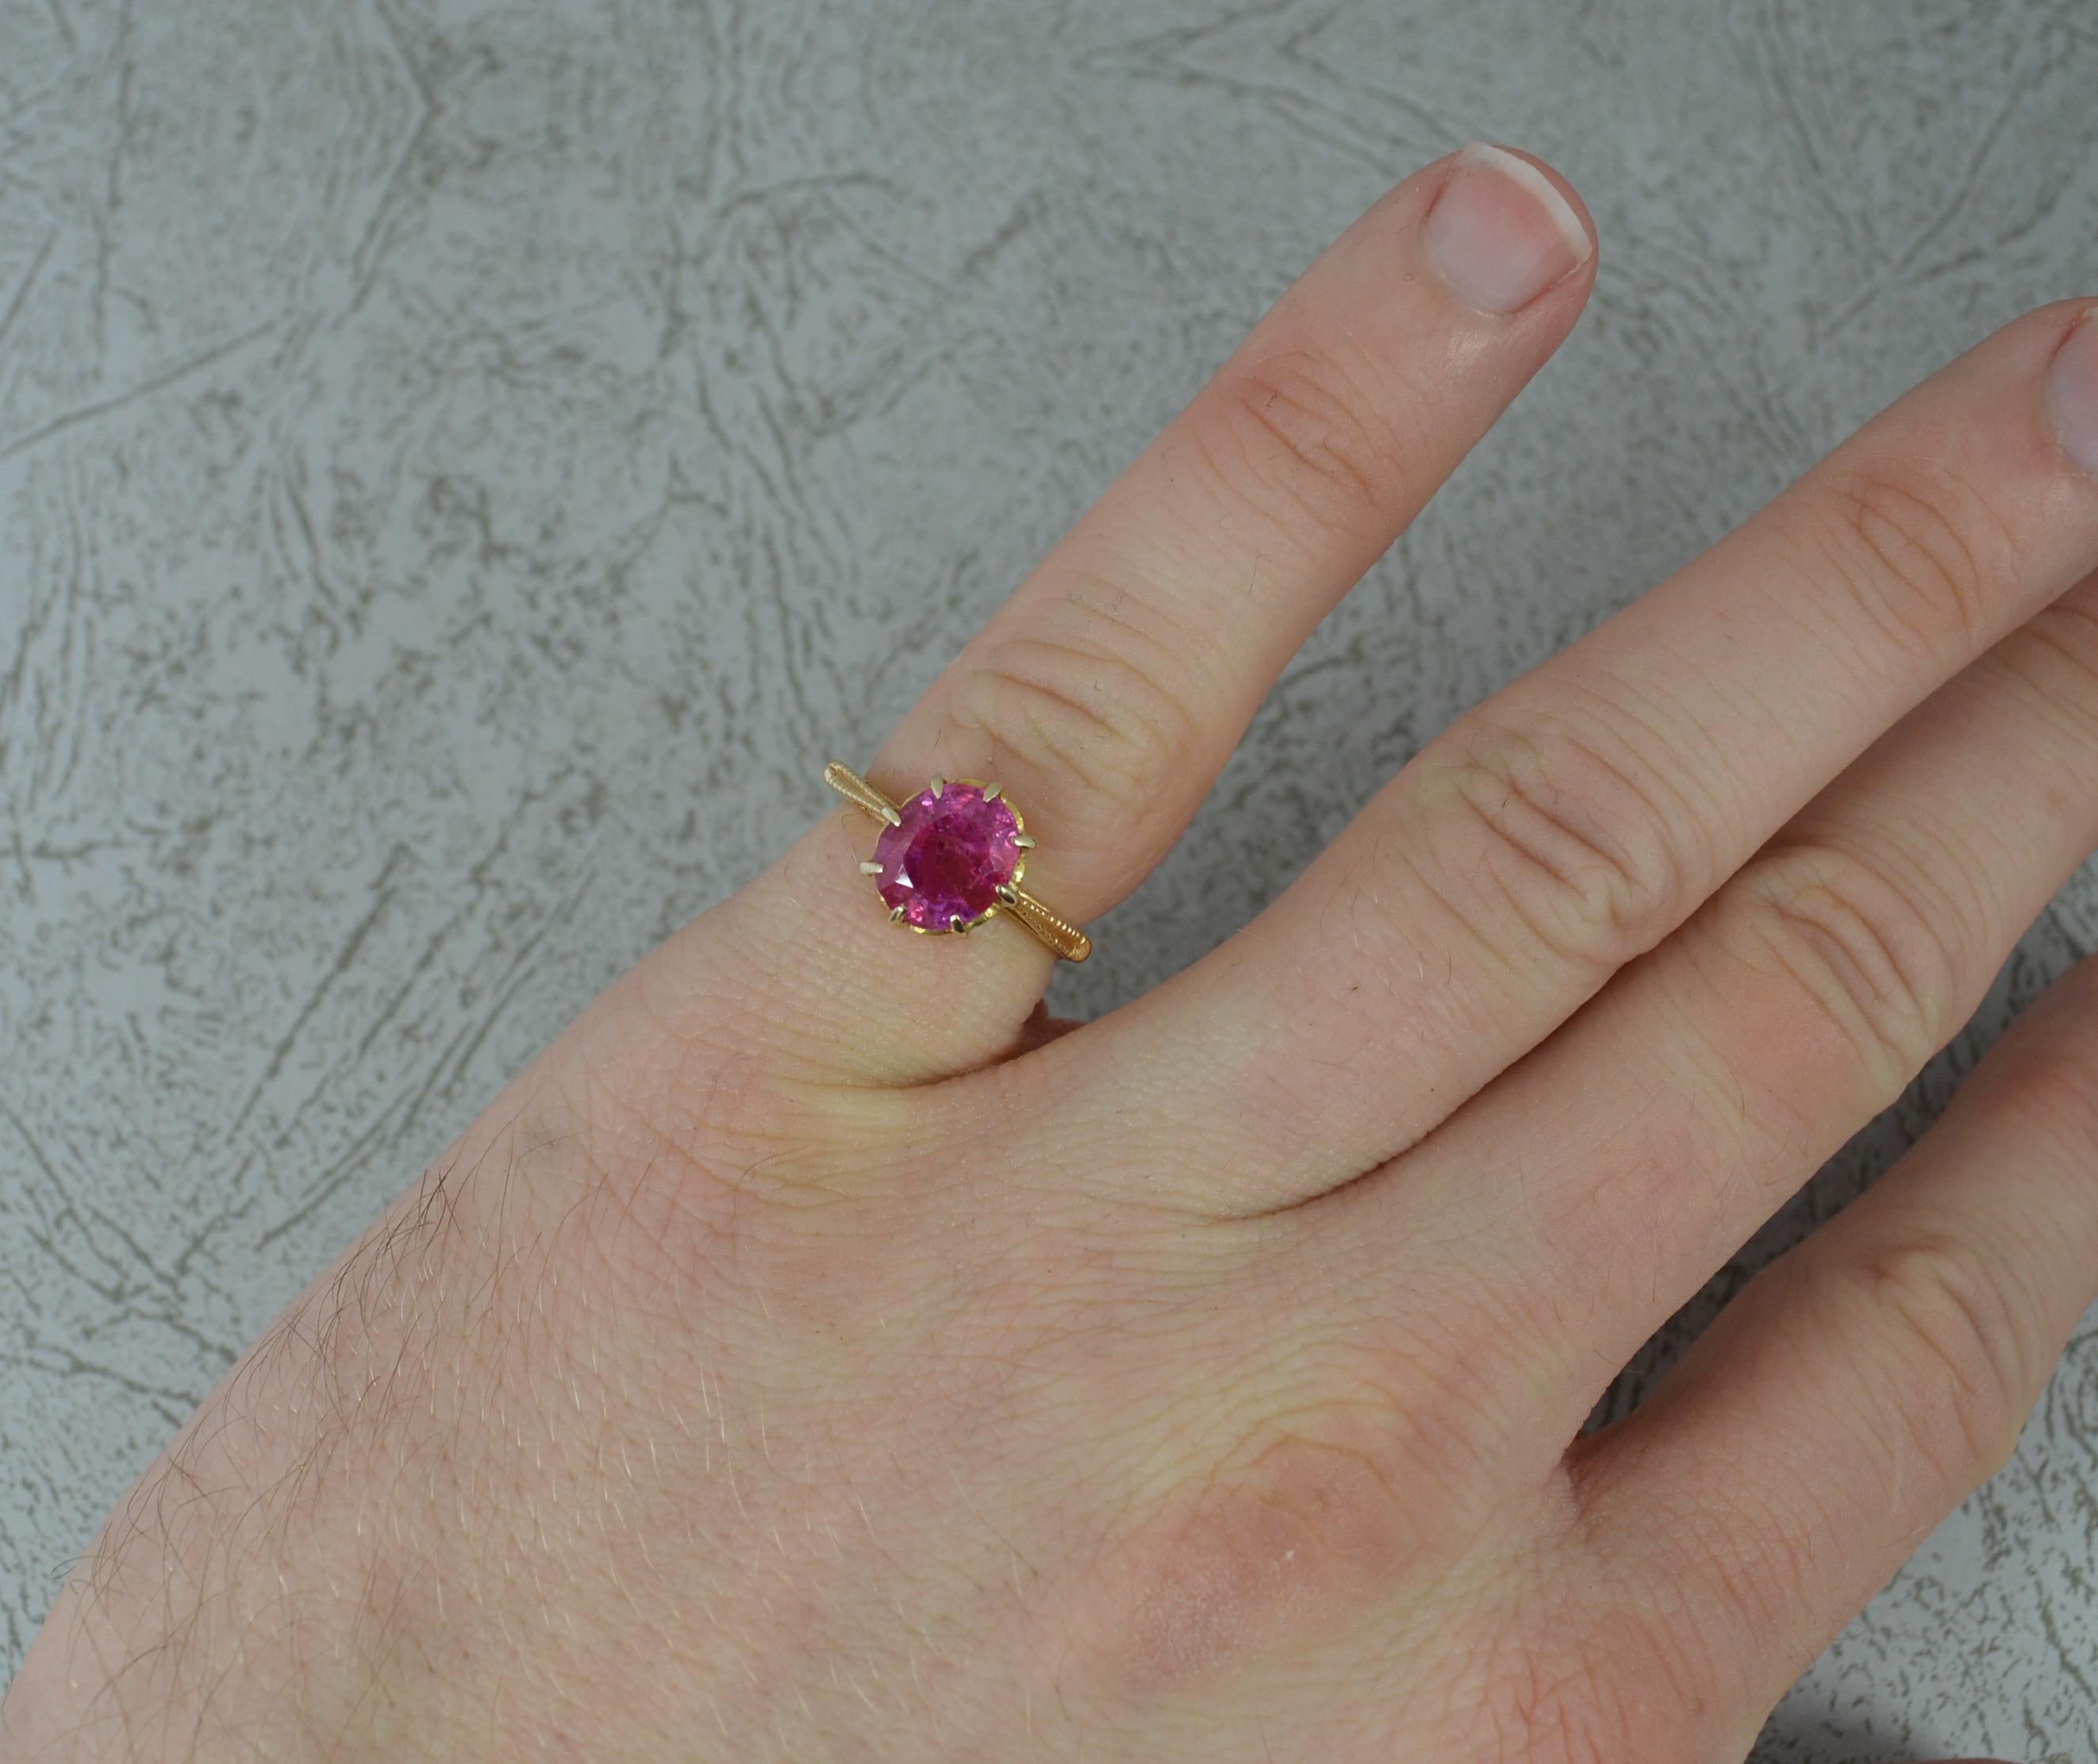 A beautiful ruby solitaire ring, circa 1890/1900.
Solid 18 carat yellow gold shank and claw setting.
Designed with an oval ruby to centre, 7.1mm x 8.5mm. A stunning colour. Rare untreated / heated natural ruby.
Protruding 6.2mm off the